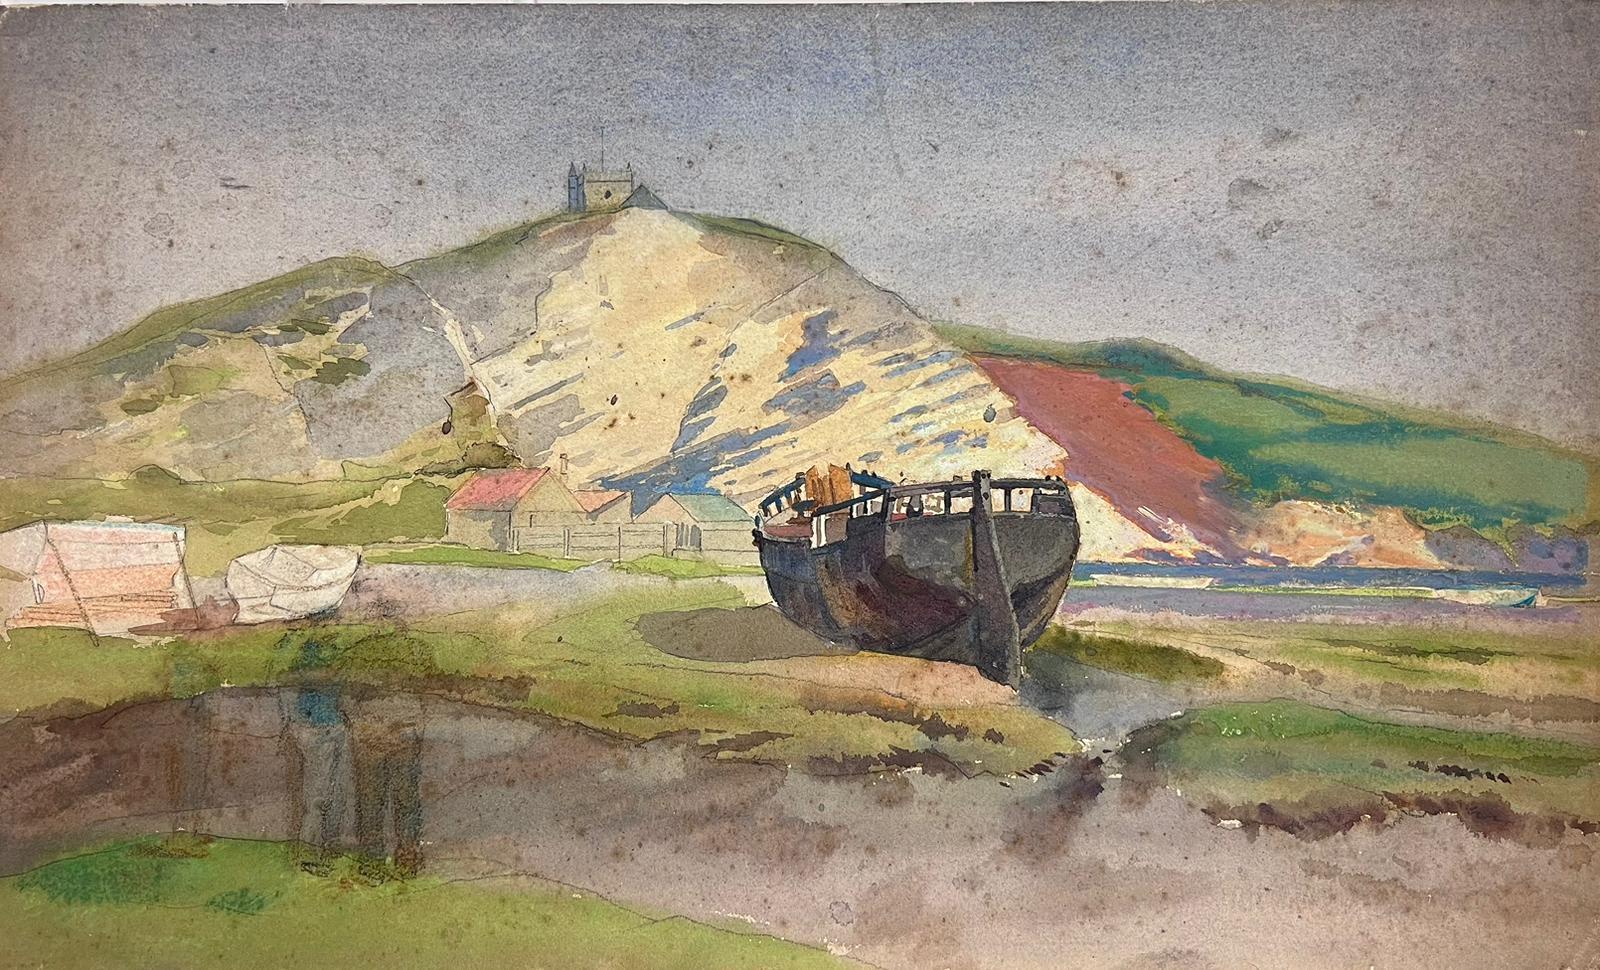 Frank Duffield Landscape Painting - Beached Wreck of a Boat Coastal Scene British 20thC Impressionist Painting 